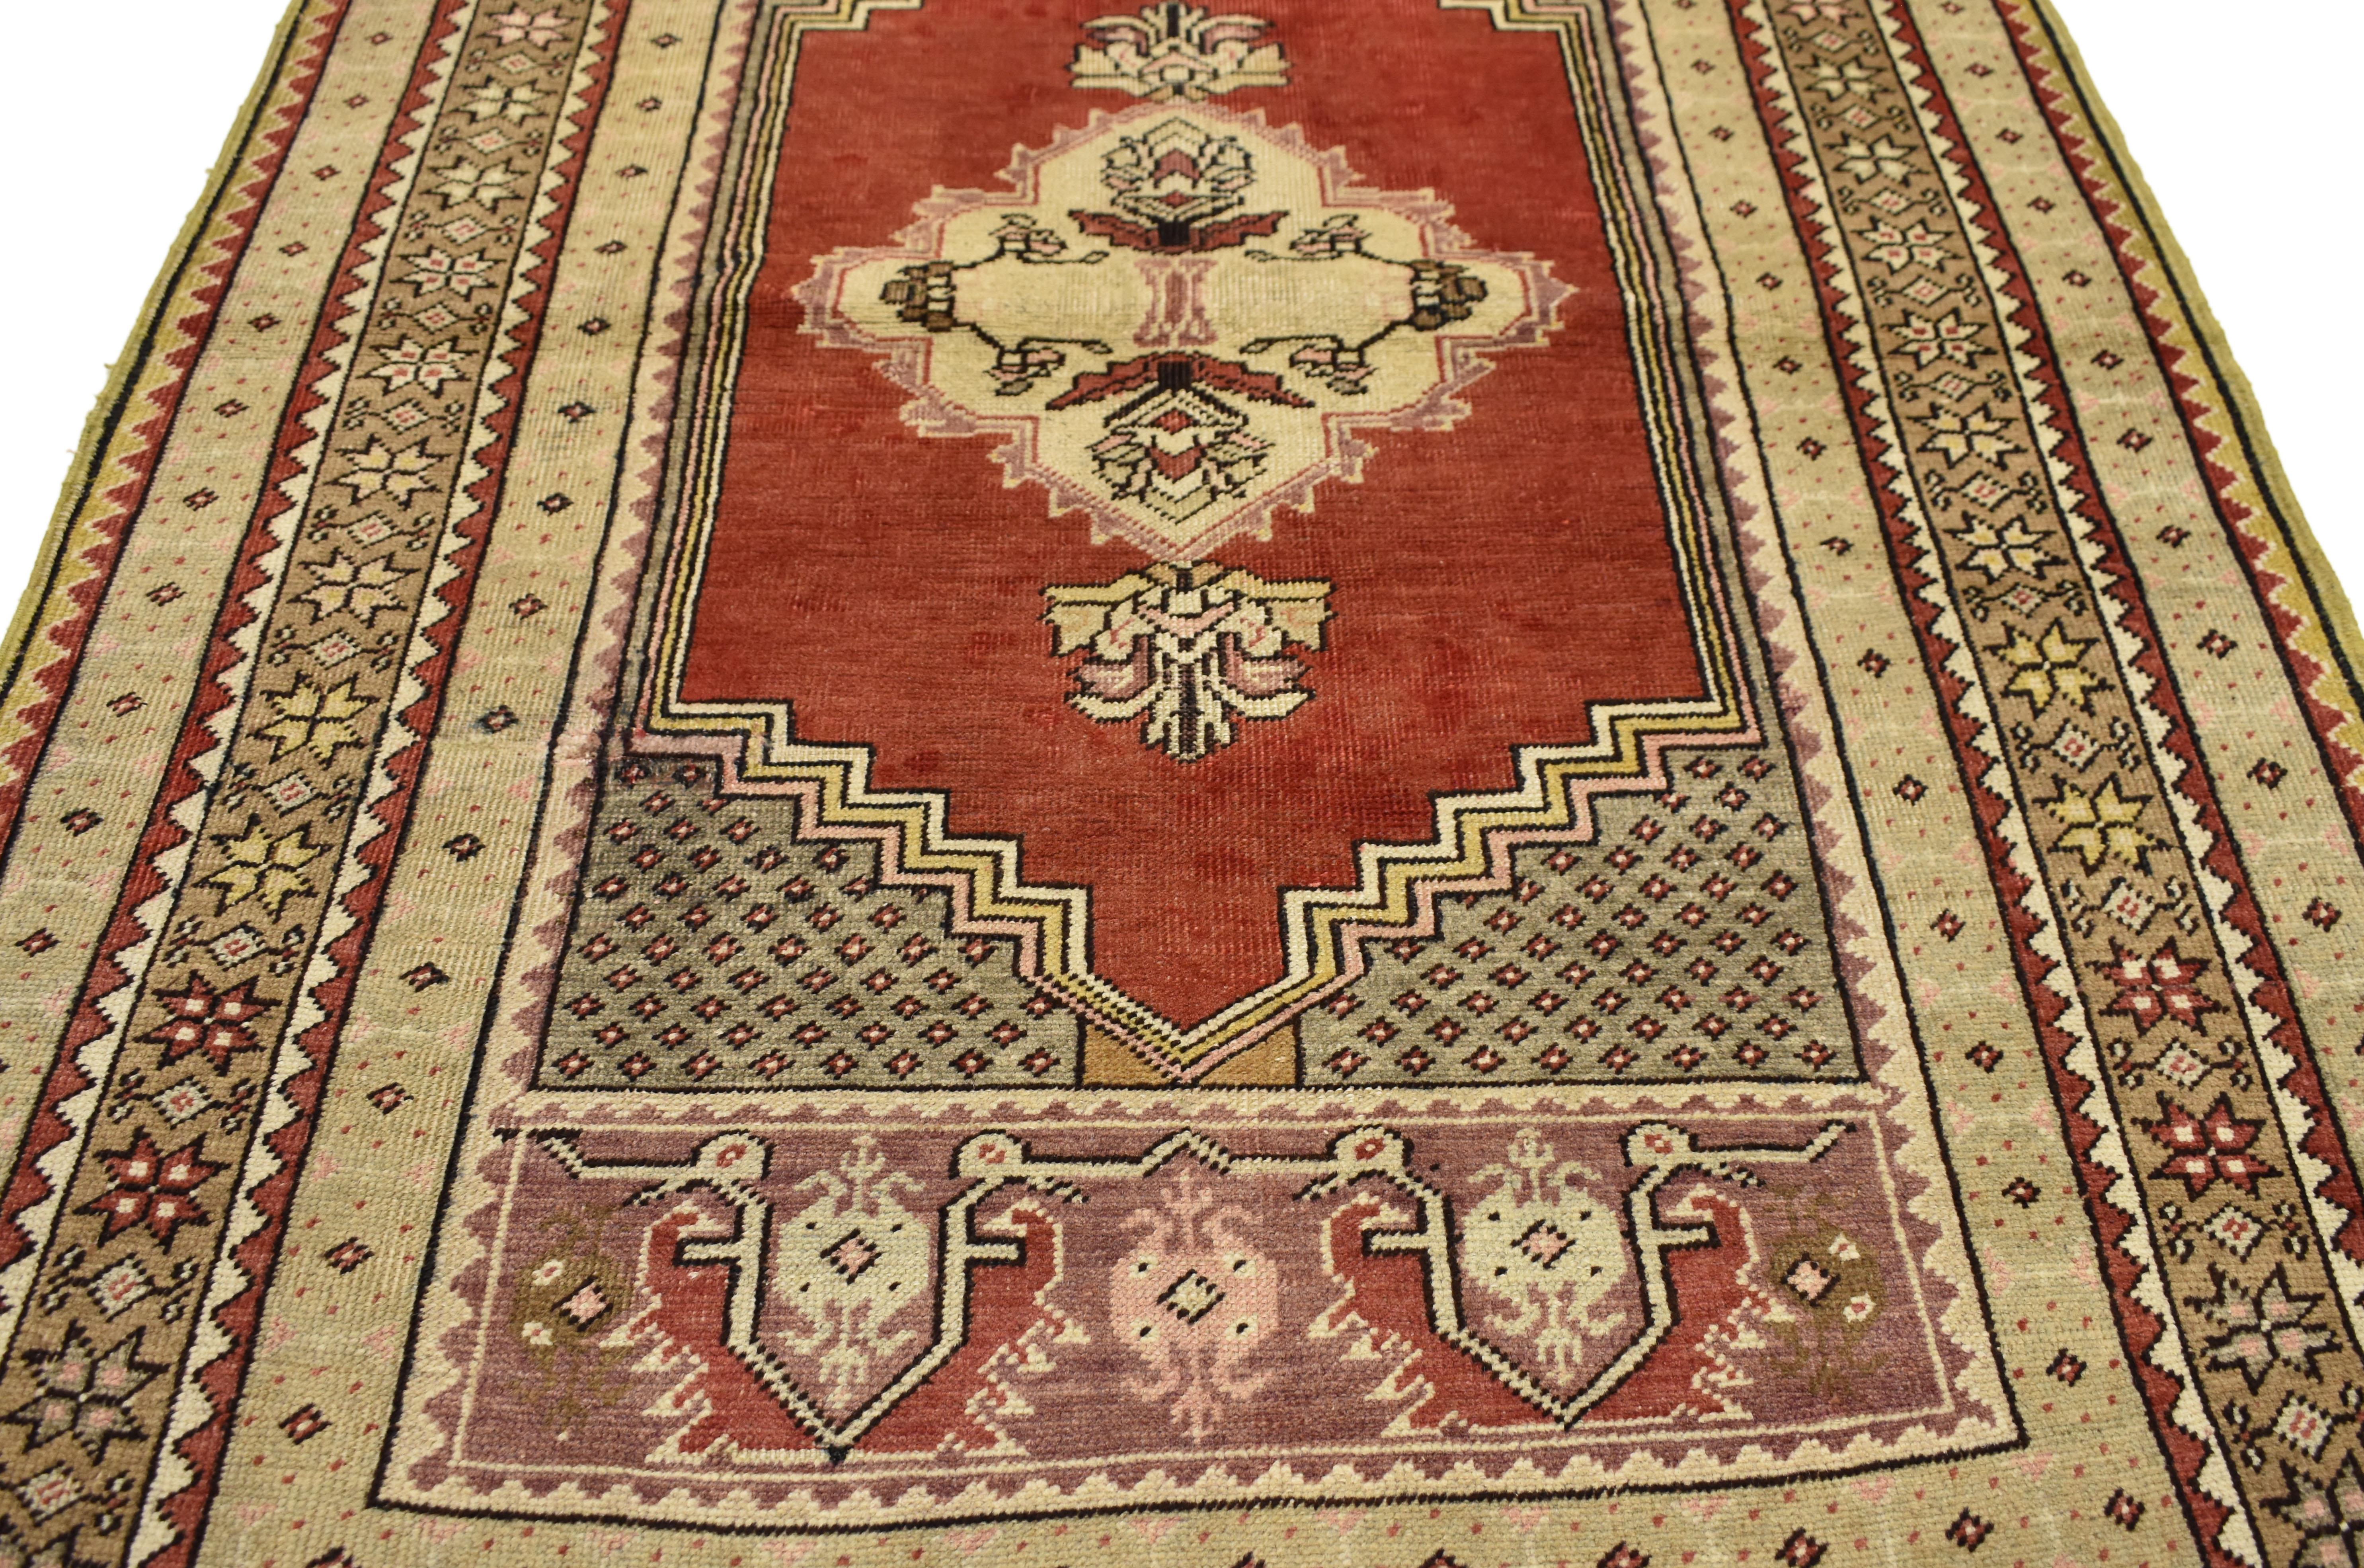 73845, vintage Turkish Oushak accent rug for kitchen, foyer, bathroom or entry rug. This hand knotted wool vintage Turkish Oushak rug features a serrated center medallion with large palmette pendants on an abrashed scarlet red field. Gray spandrels